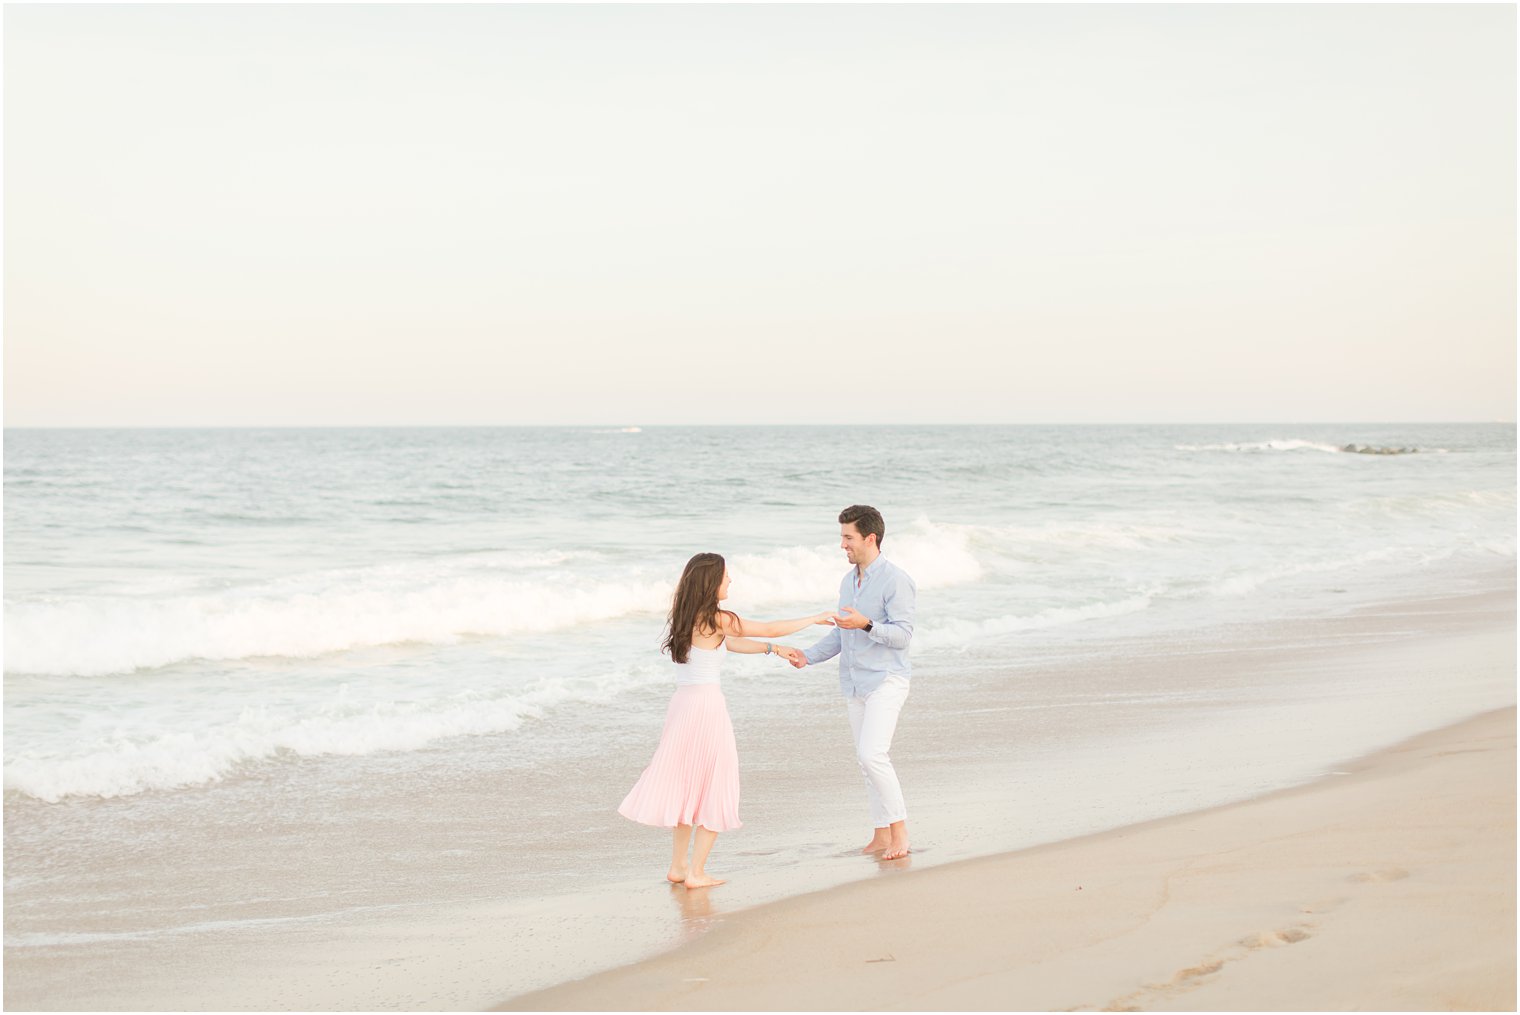 New Jersey couple dances in the ocean during engagement photos